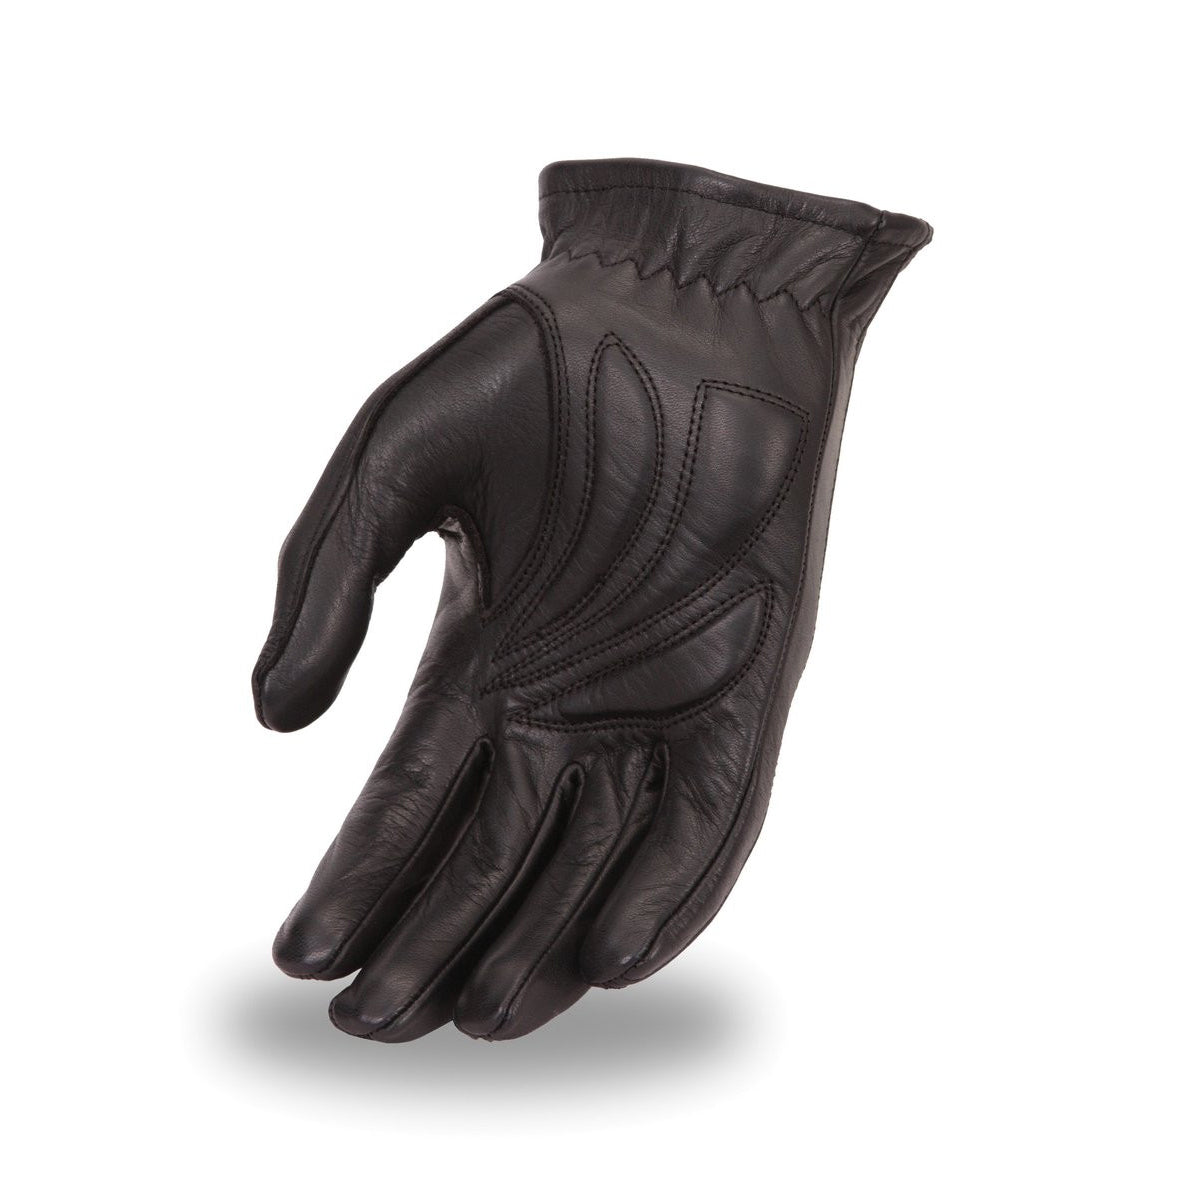 Motorcycle Ladies Blk Soft leather gloves with Zipper gel palm